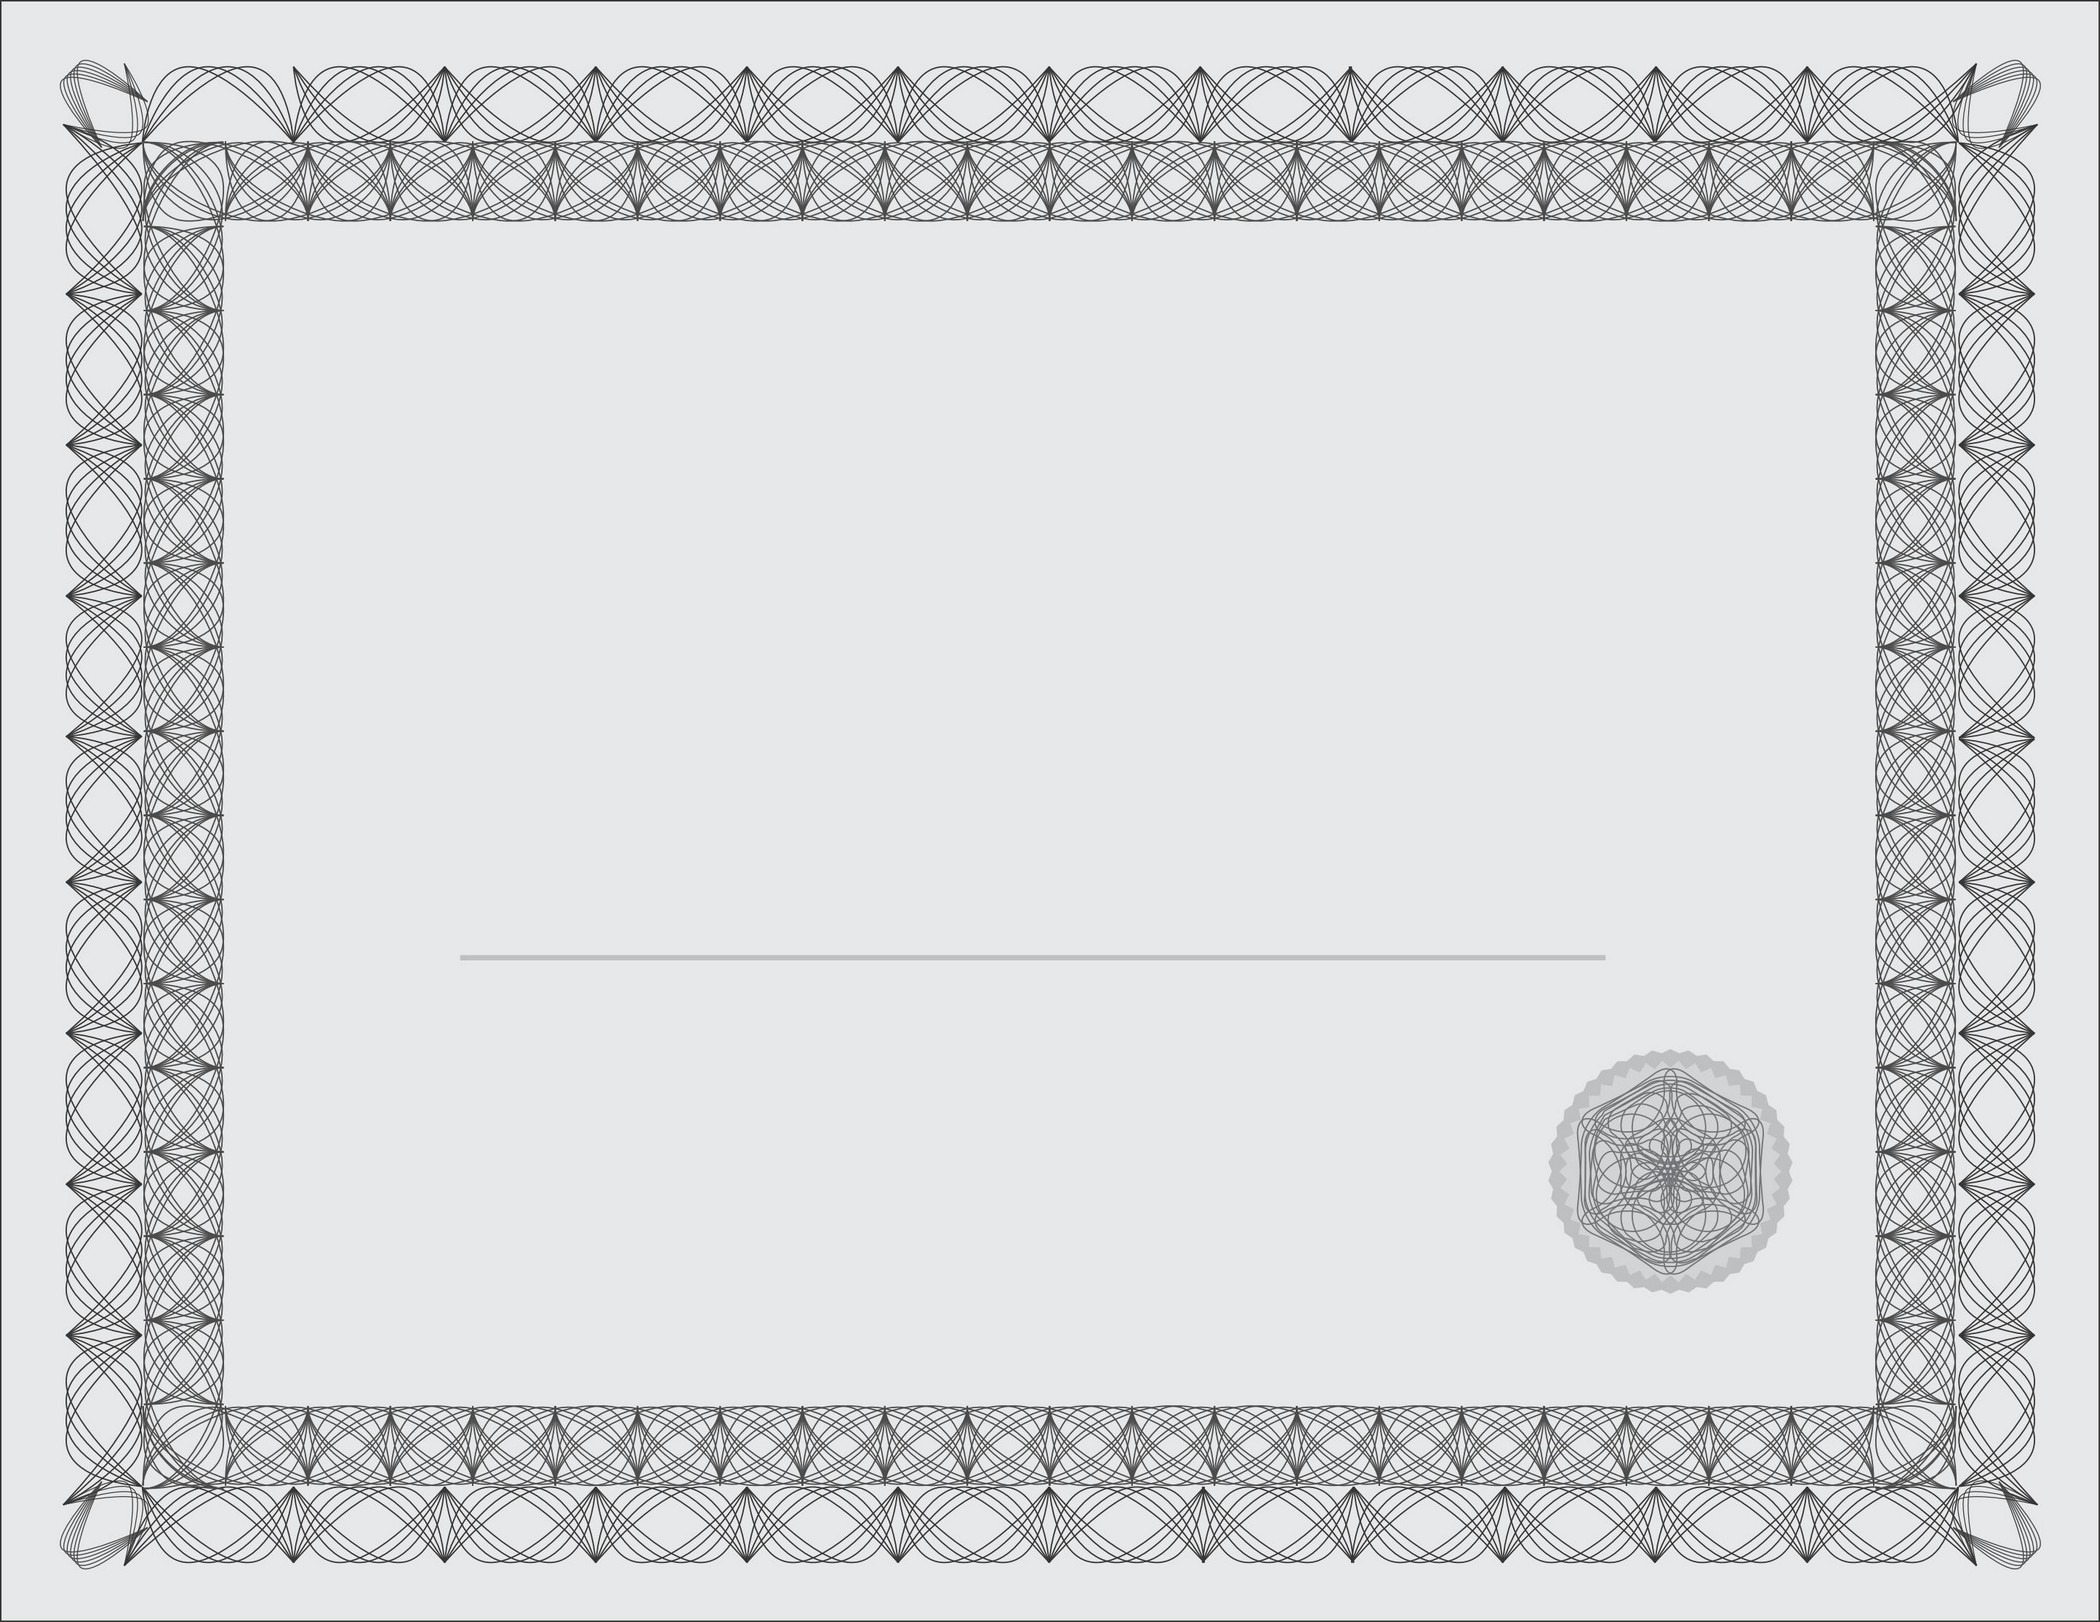 Certificate Border Vector Free Download At Collection